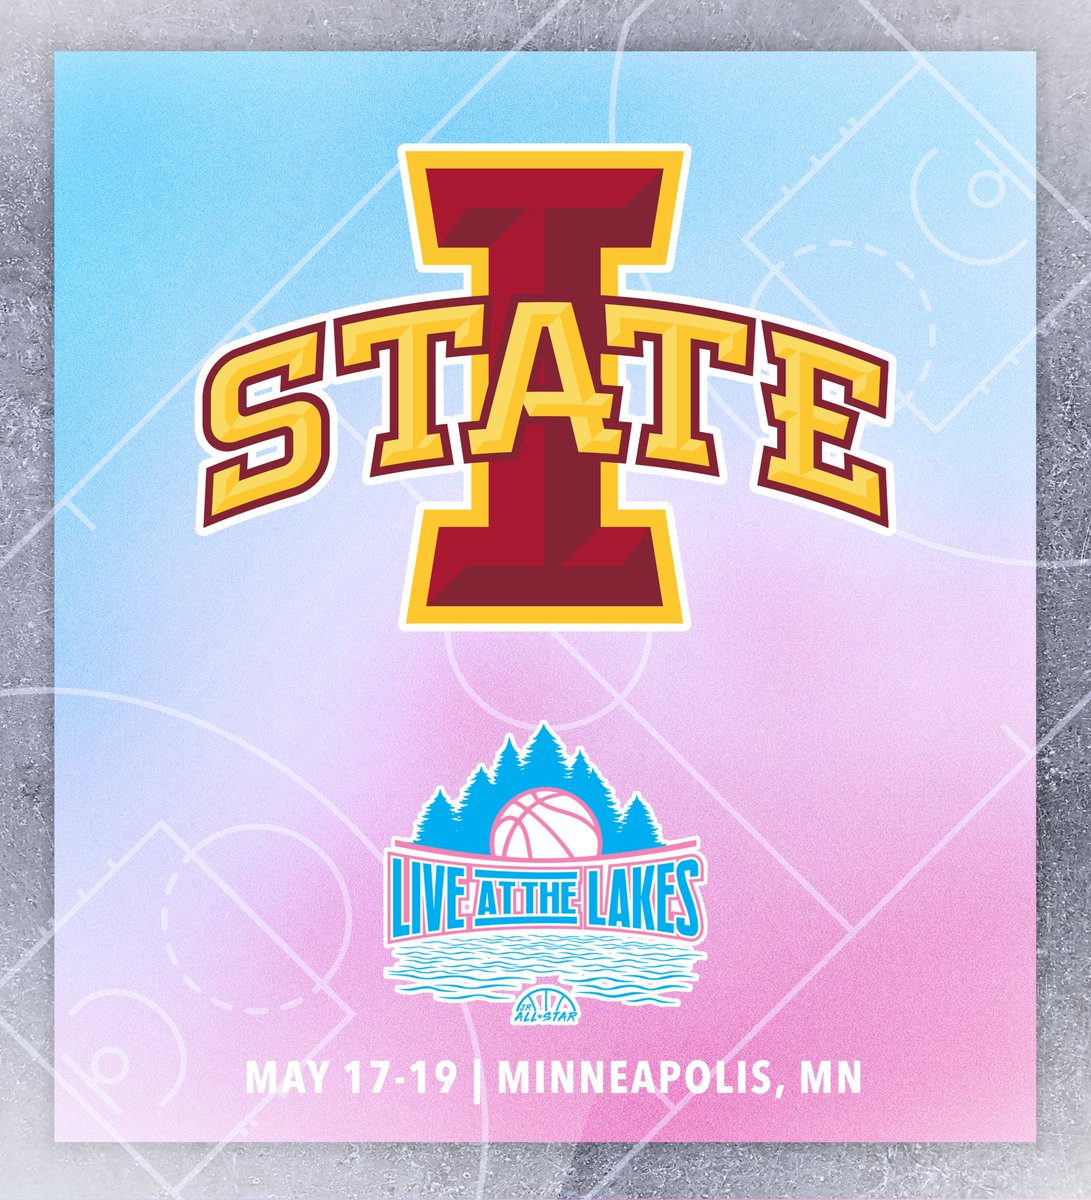 Iowa State University (@CycloneWBB) will be at 𝗟𝗜𝗩𝗘 𝗔𝗧 𝗧𝗛𝗘 𝗟𝗔𝗞𝗘𝗦! Don’t miss out on the action in Minnesota, where some of the nation’s top talent will go head-to-head. Register now! 🤩 jrallstar.com/exposure-event…